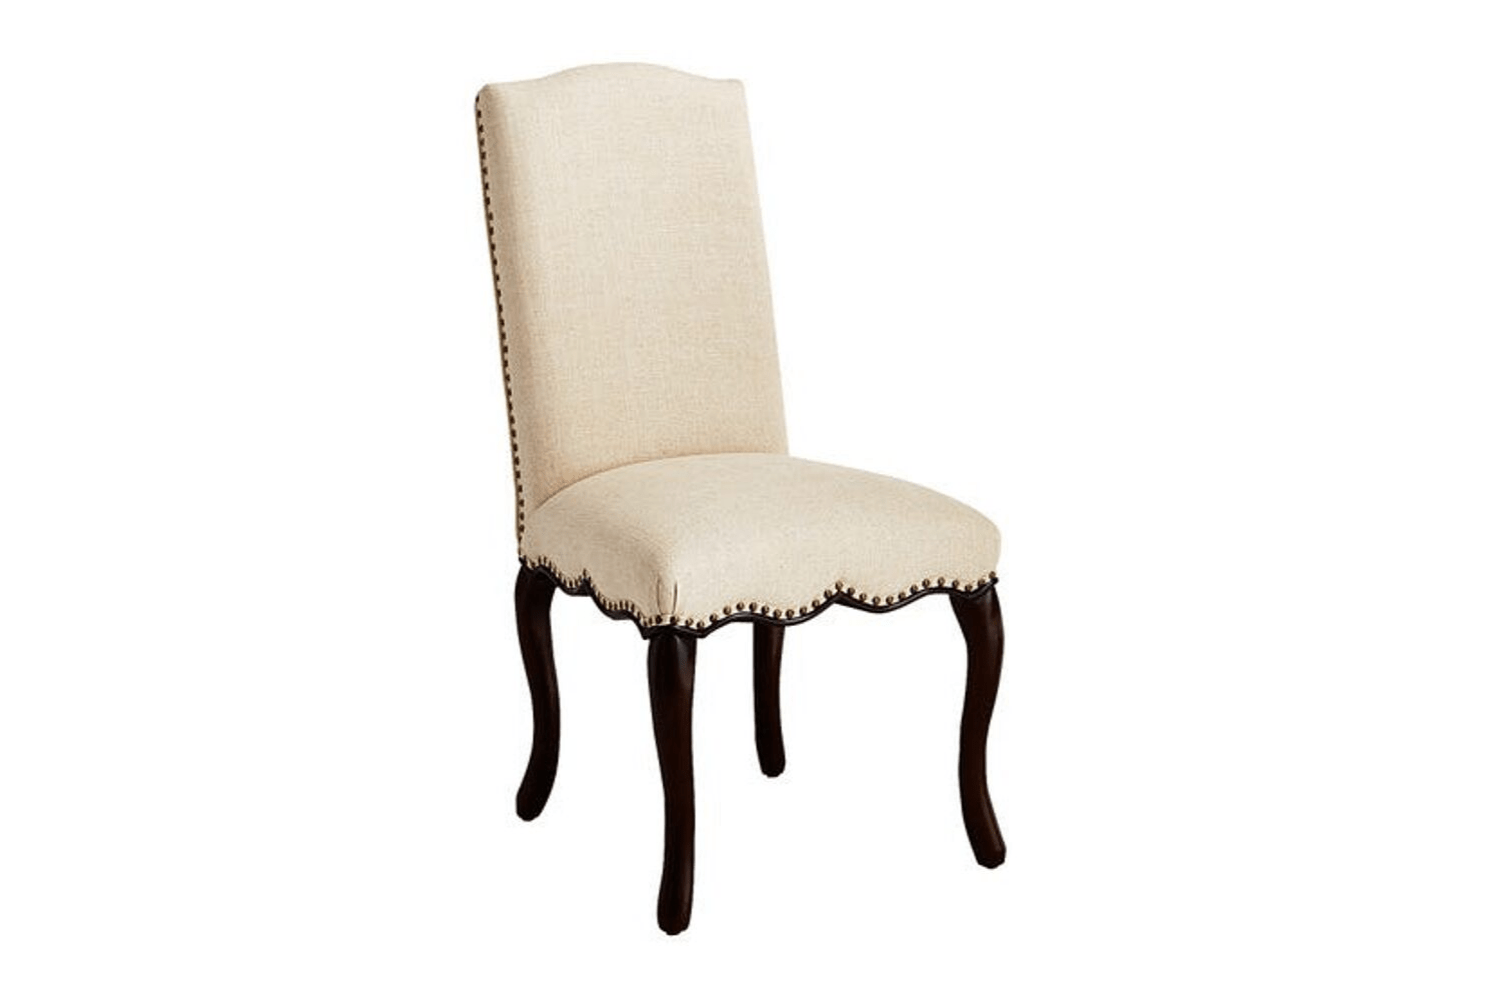 Dining Room Chairs At Pier One